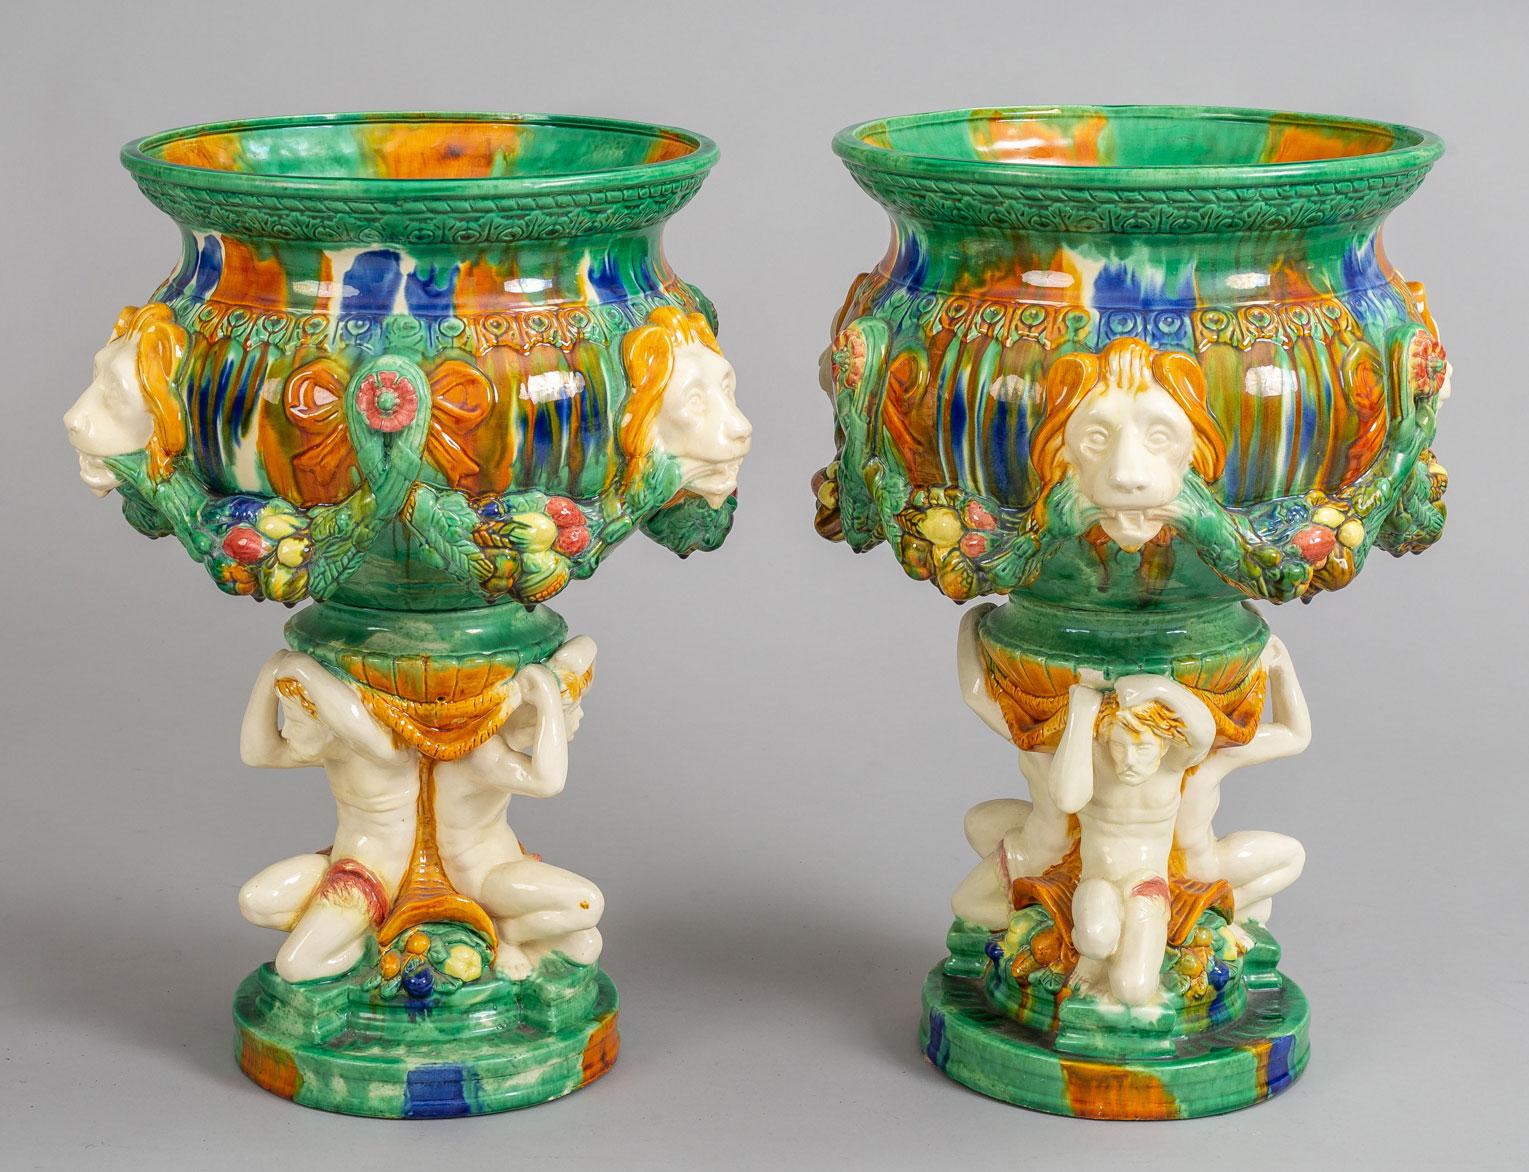 Pair of Majolica multicolored pedestal jardinières, the bowl decorated with bow tied swags of fruit and foliage terminating at lions heads, supported atop a base molded with three partially draped male figures holding up the bowl. Between each of